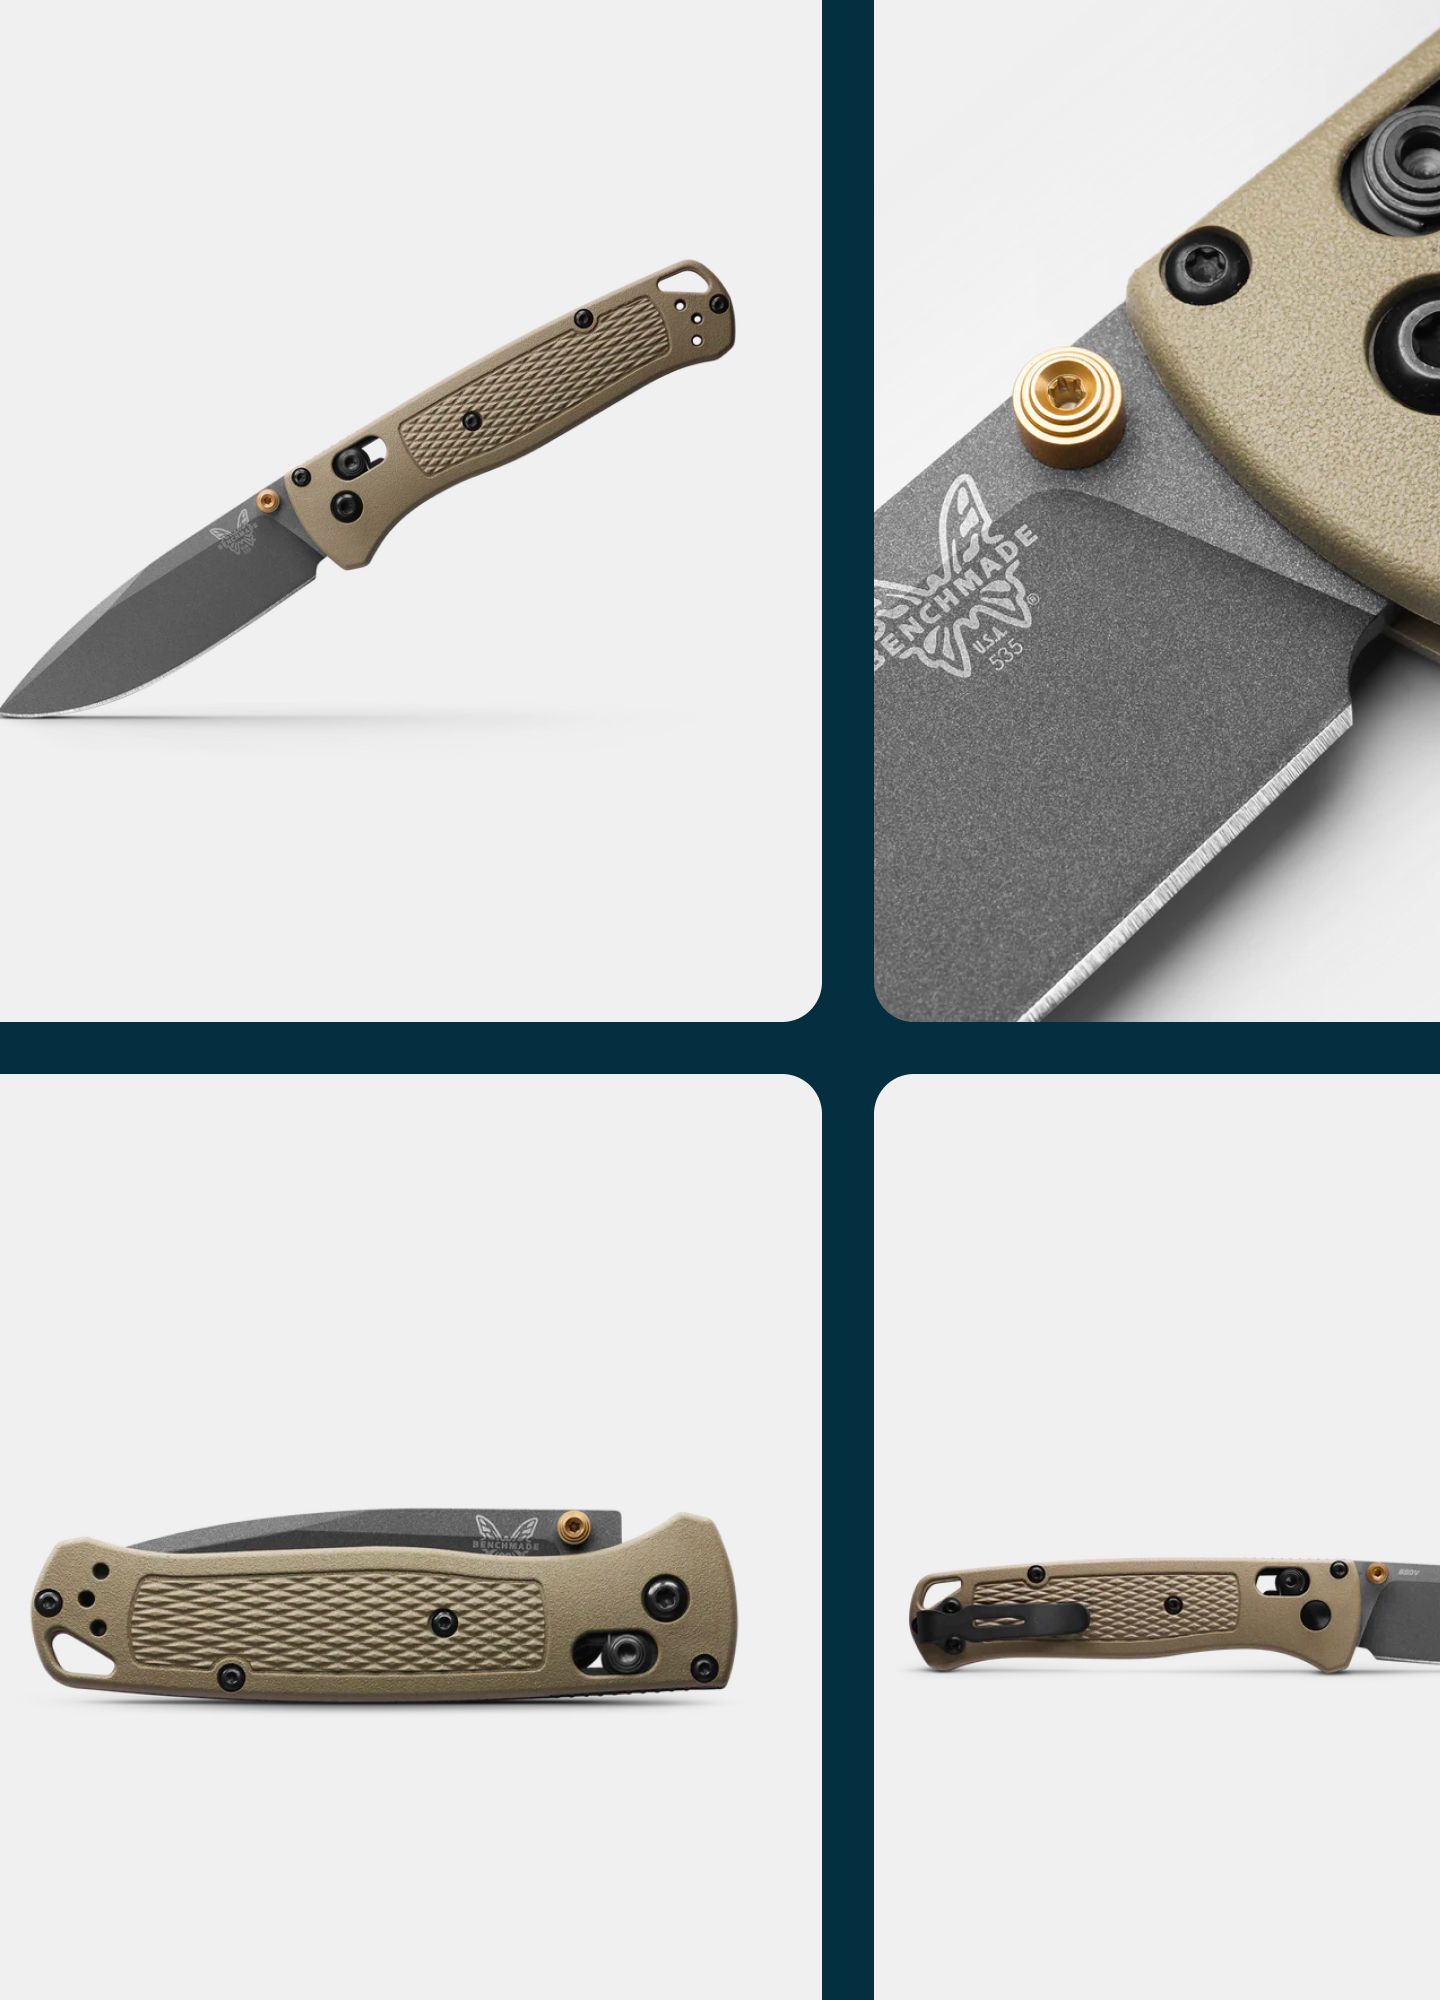 Detail shots of Benchmade knife